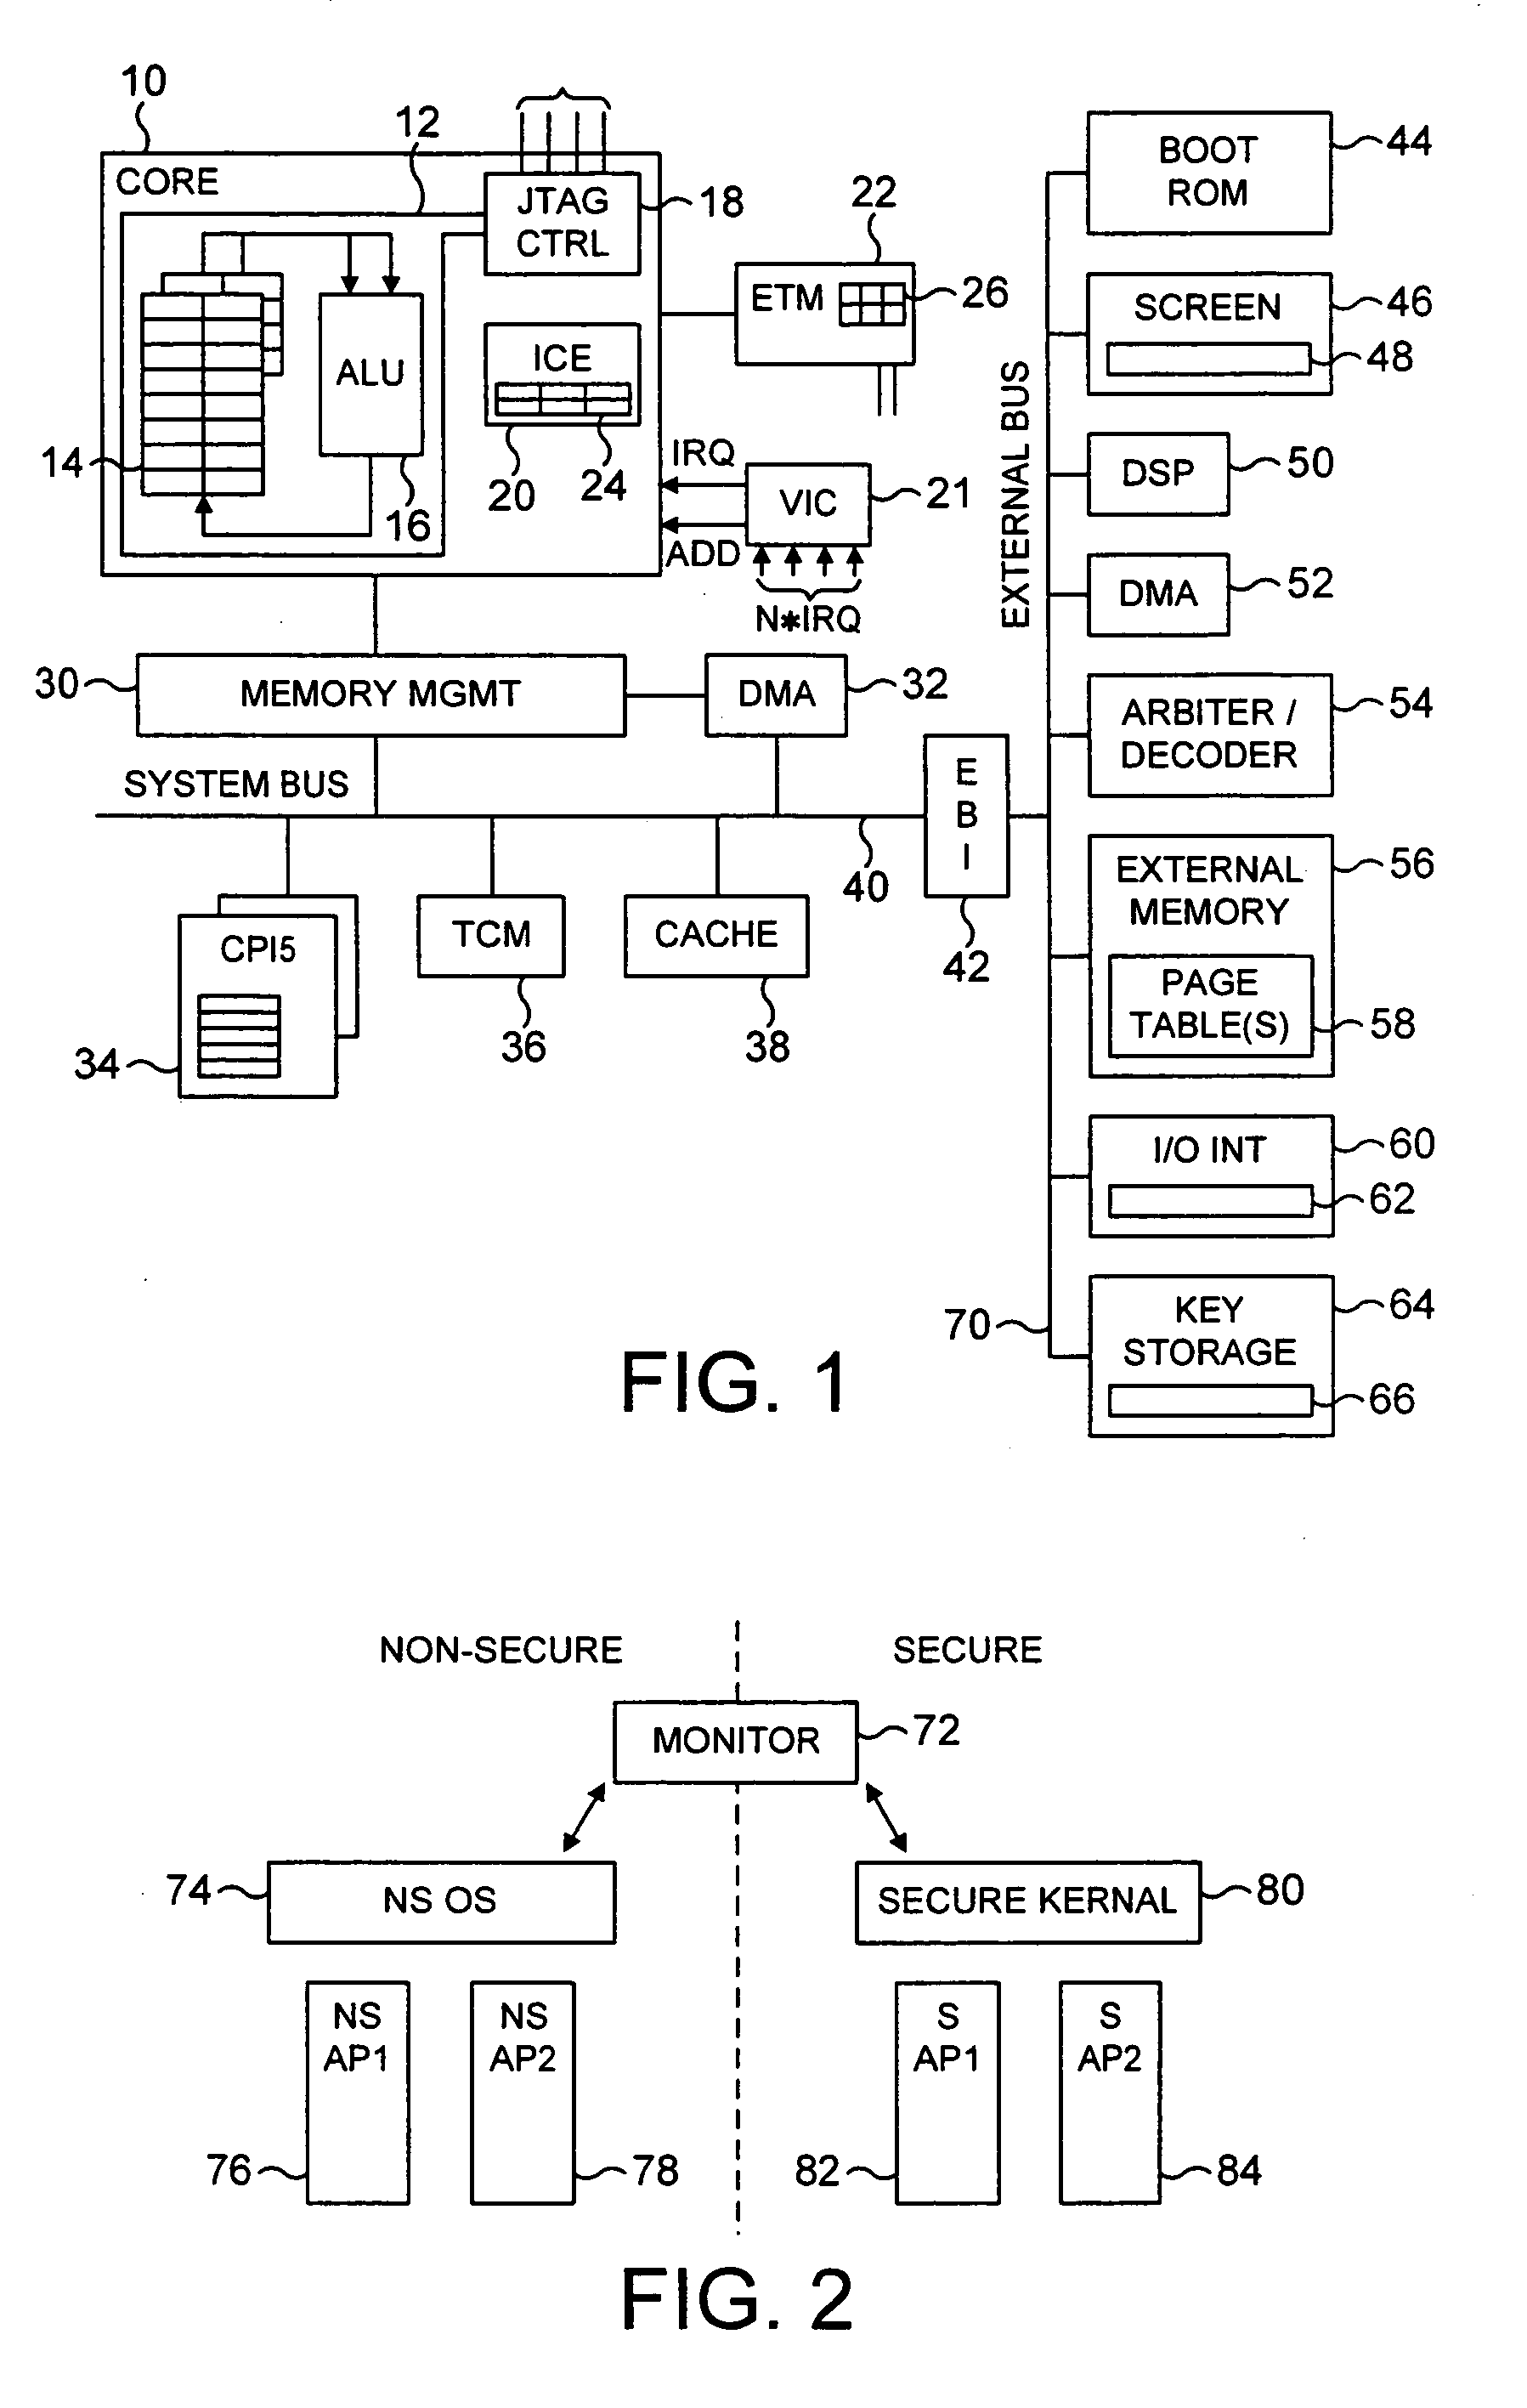 Function control for a processor